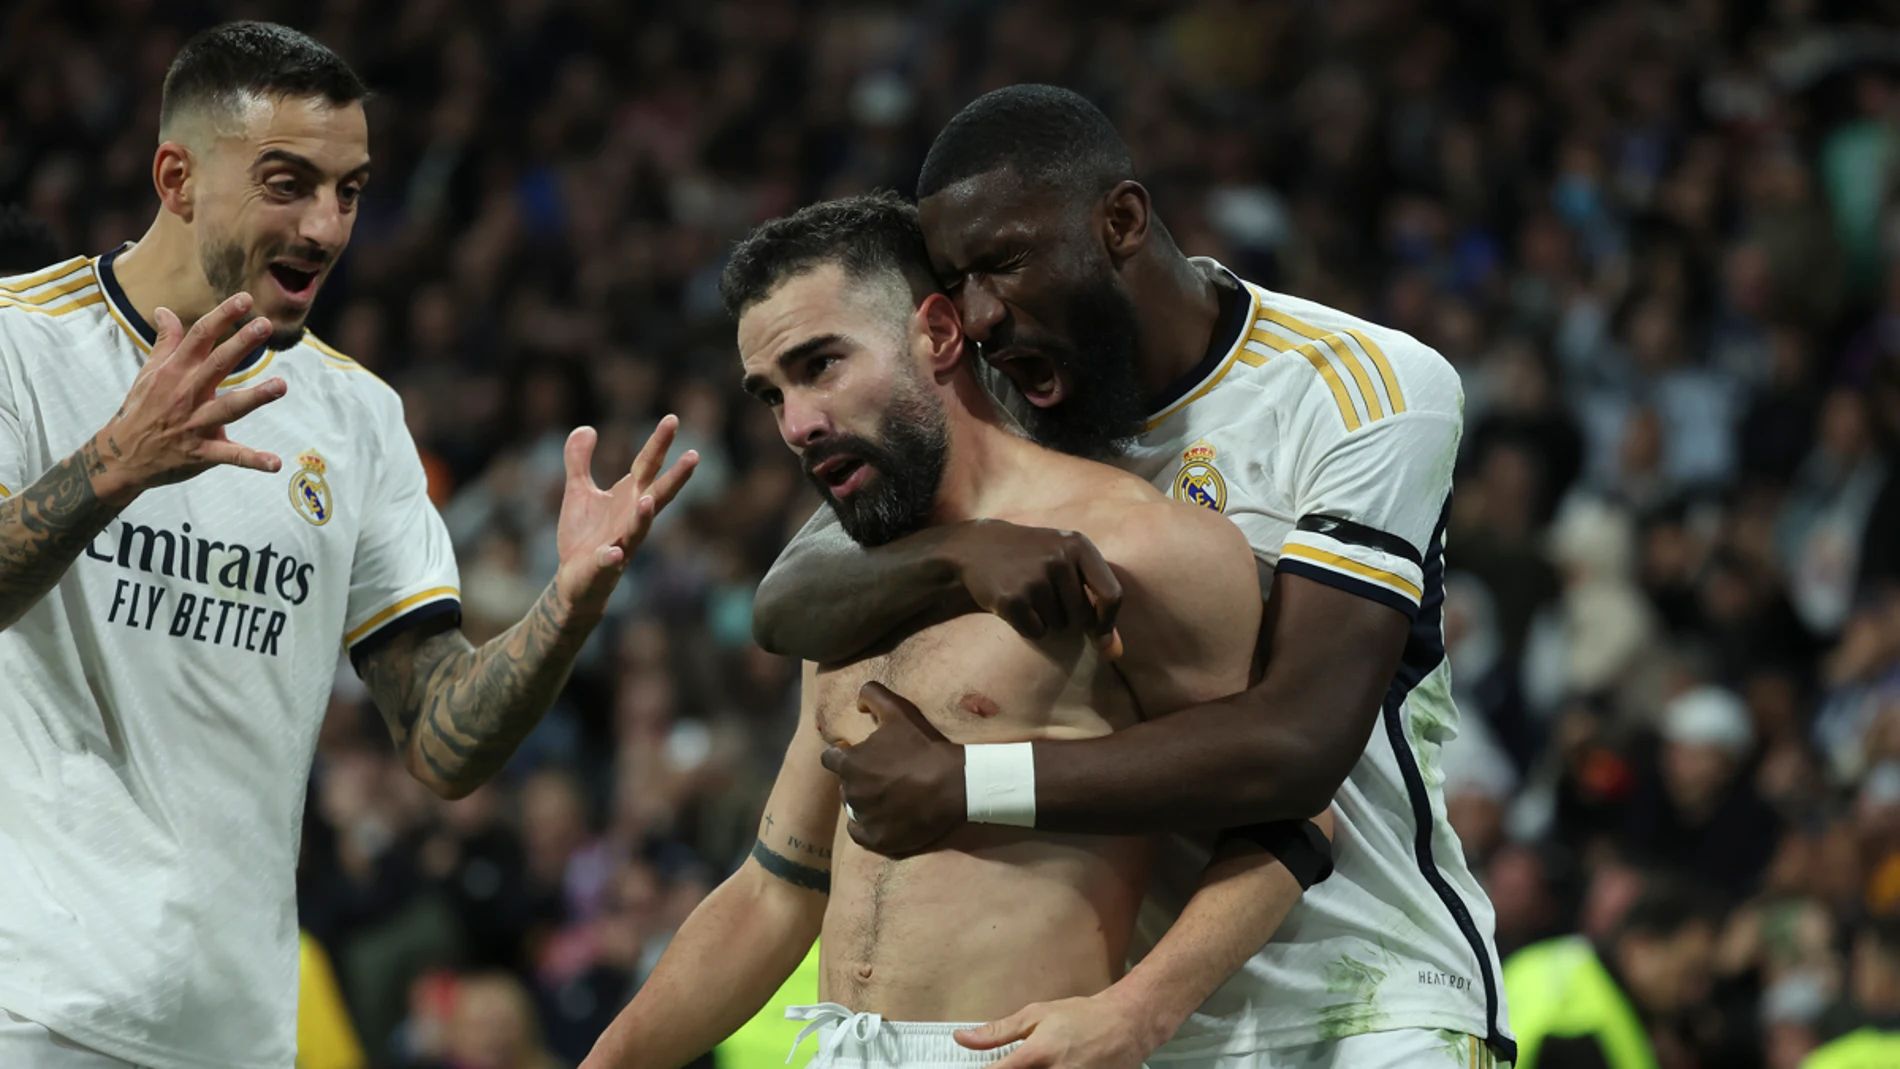 Official: Real Madrid dealt major blow for Madrid derby as key defender succumbs to injury